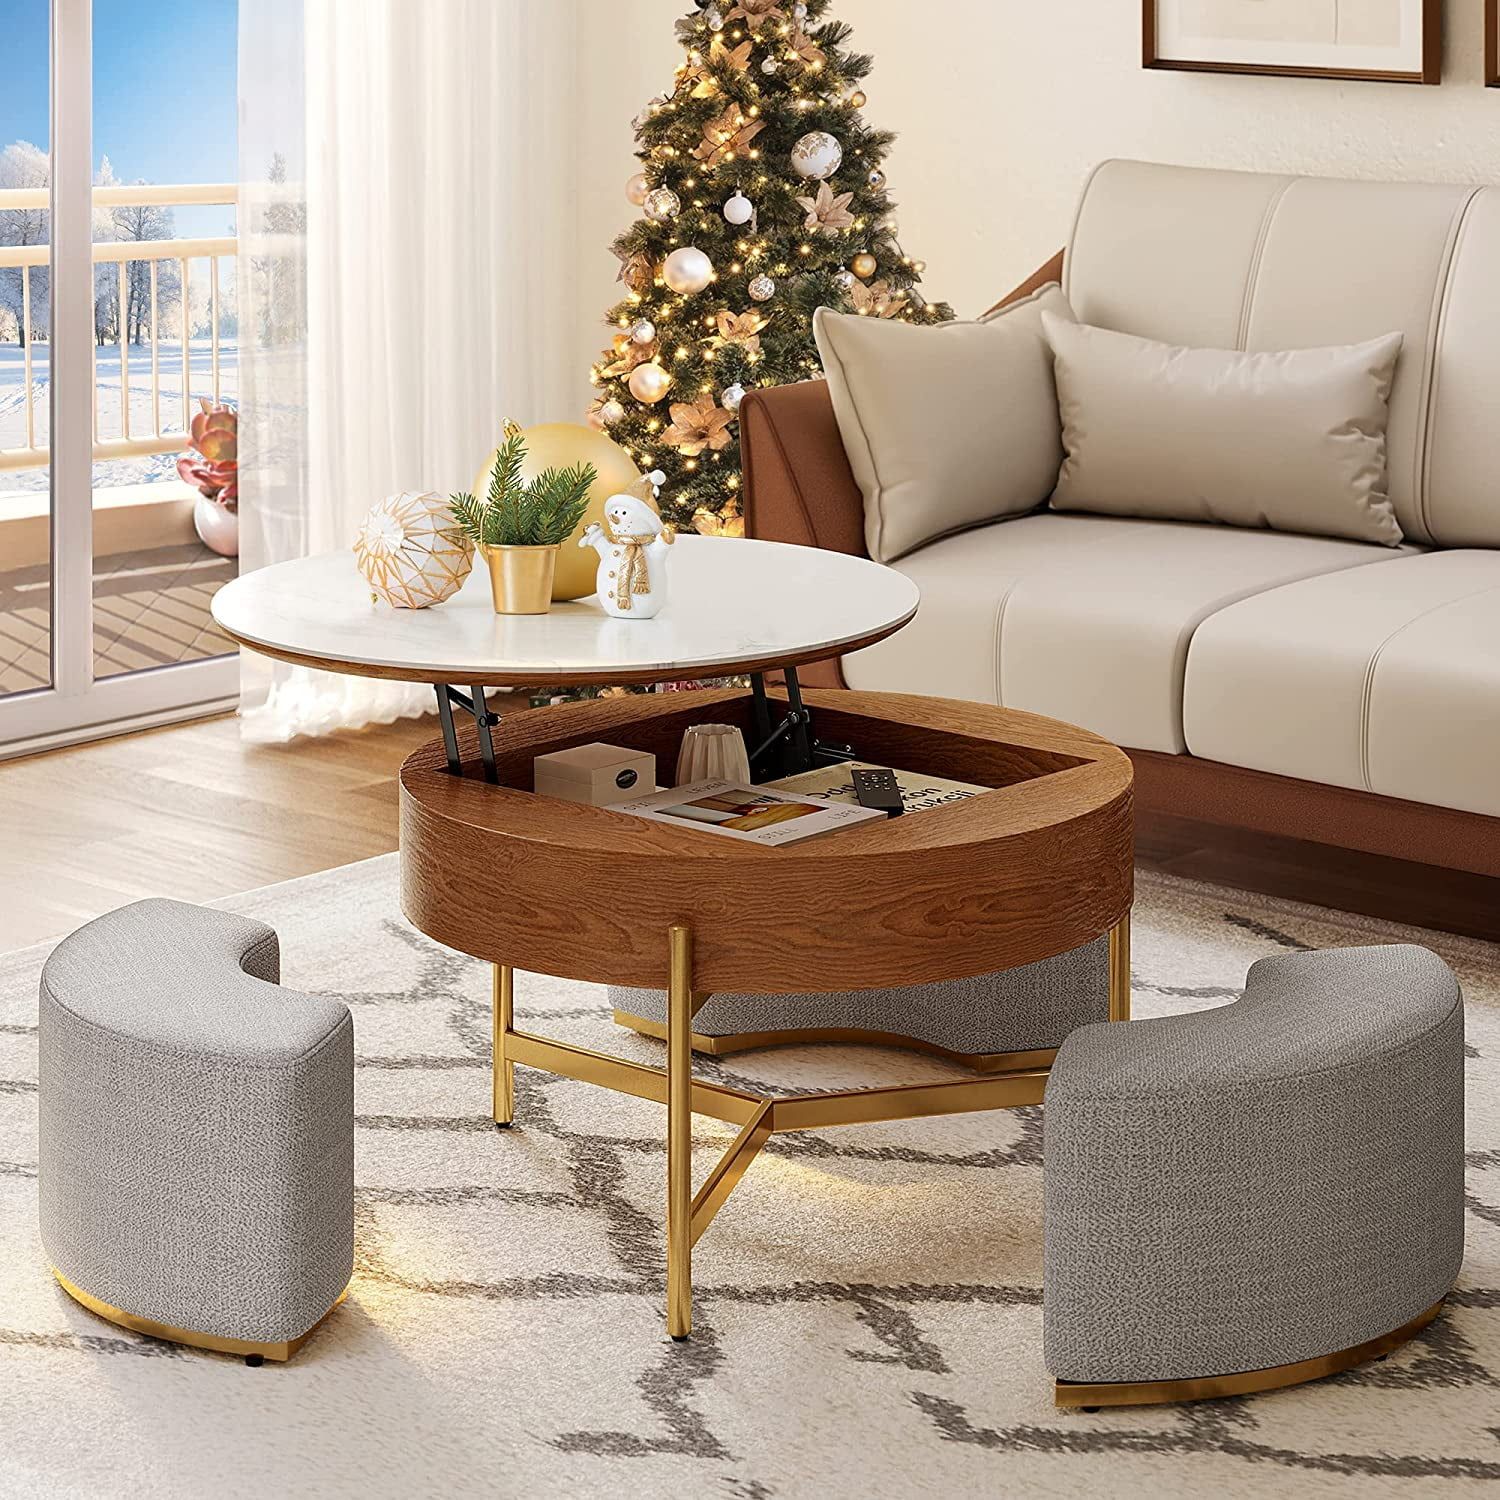 Lift Top Round Coffee Table With Storage Compartment 3 Stools Pop Up Stone  Tabletop Rising Top Modern Coffee Table Set For Living Room Apartment –  Walmart Intended For Round Coffee Tables With Storage (Photo 2 of 15)